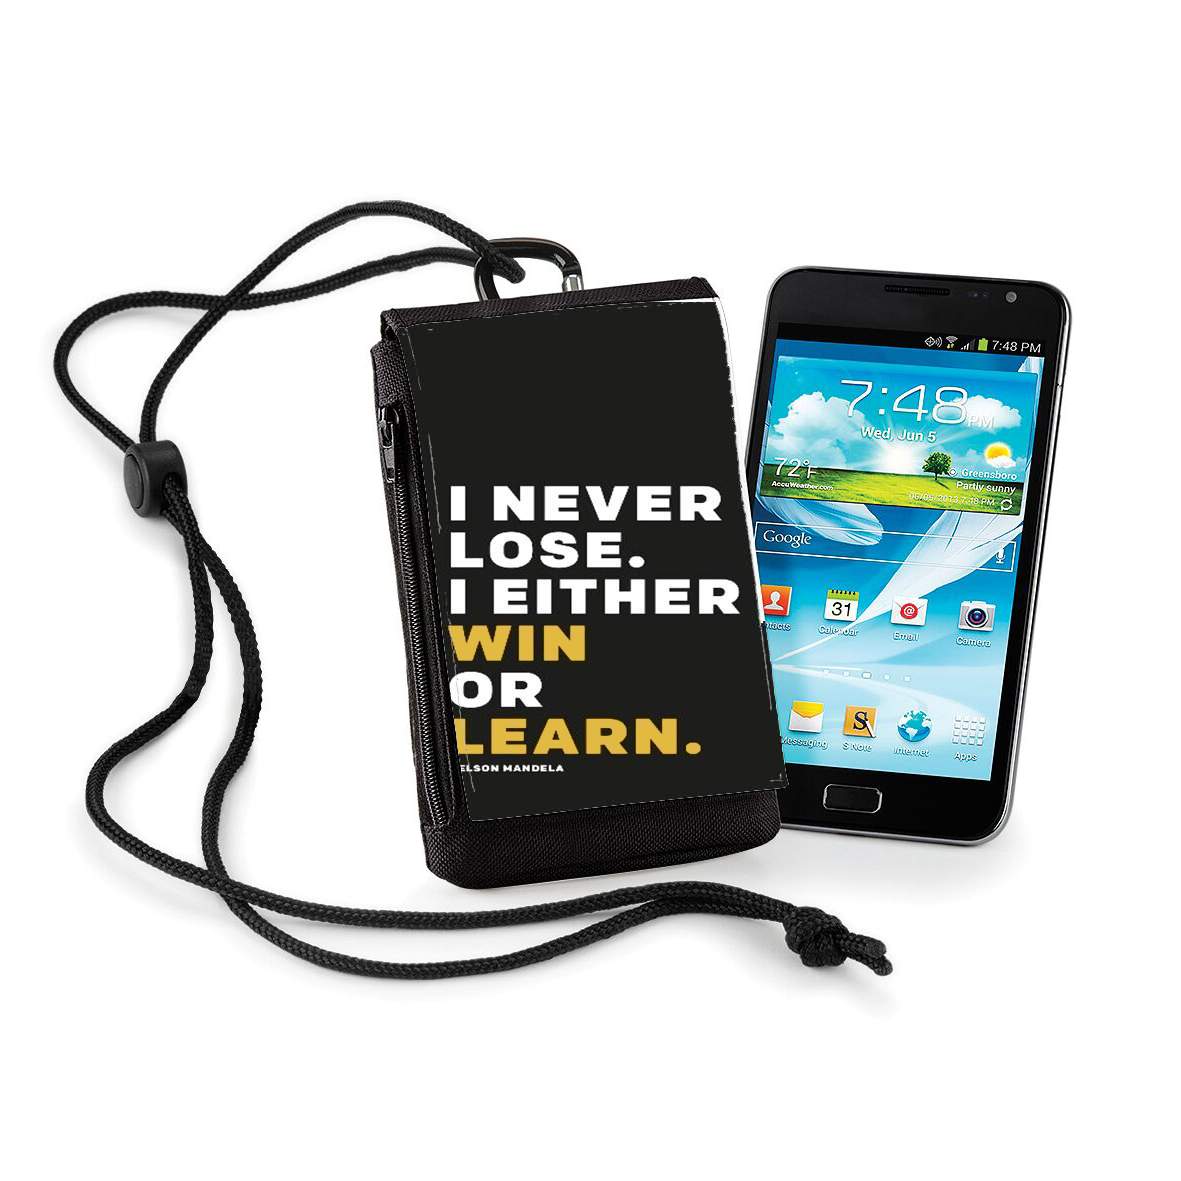 Pochette de téléphone - Taille normal pour i never lose either i win or i learn Nelson Mandela